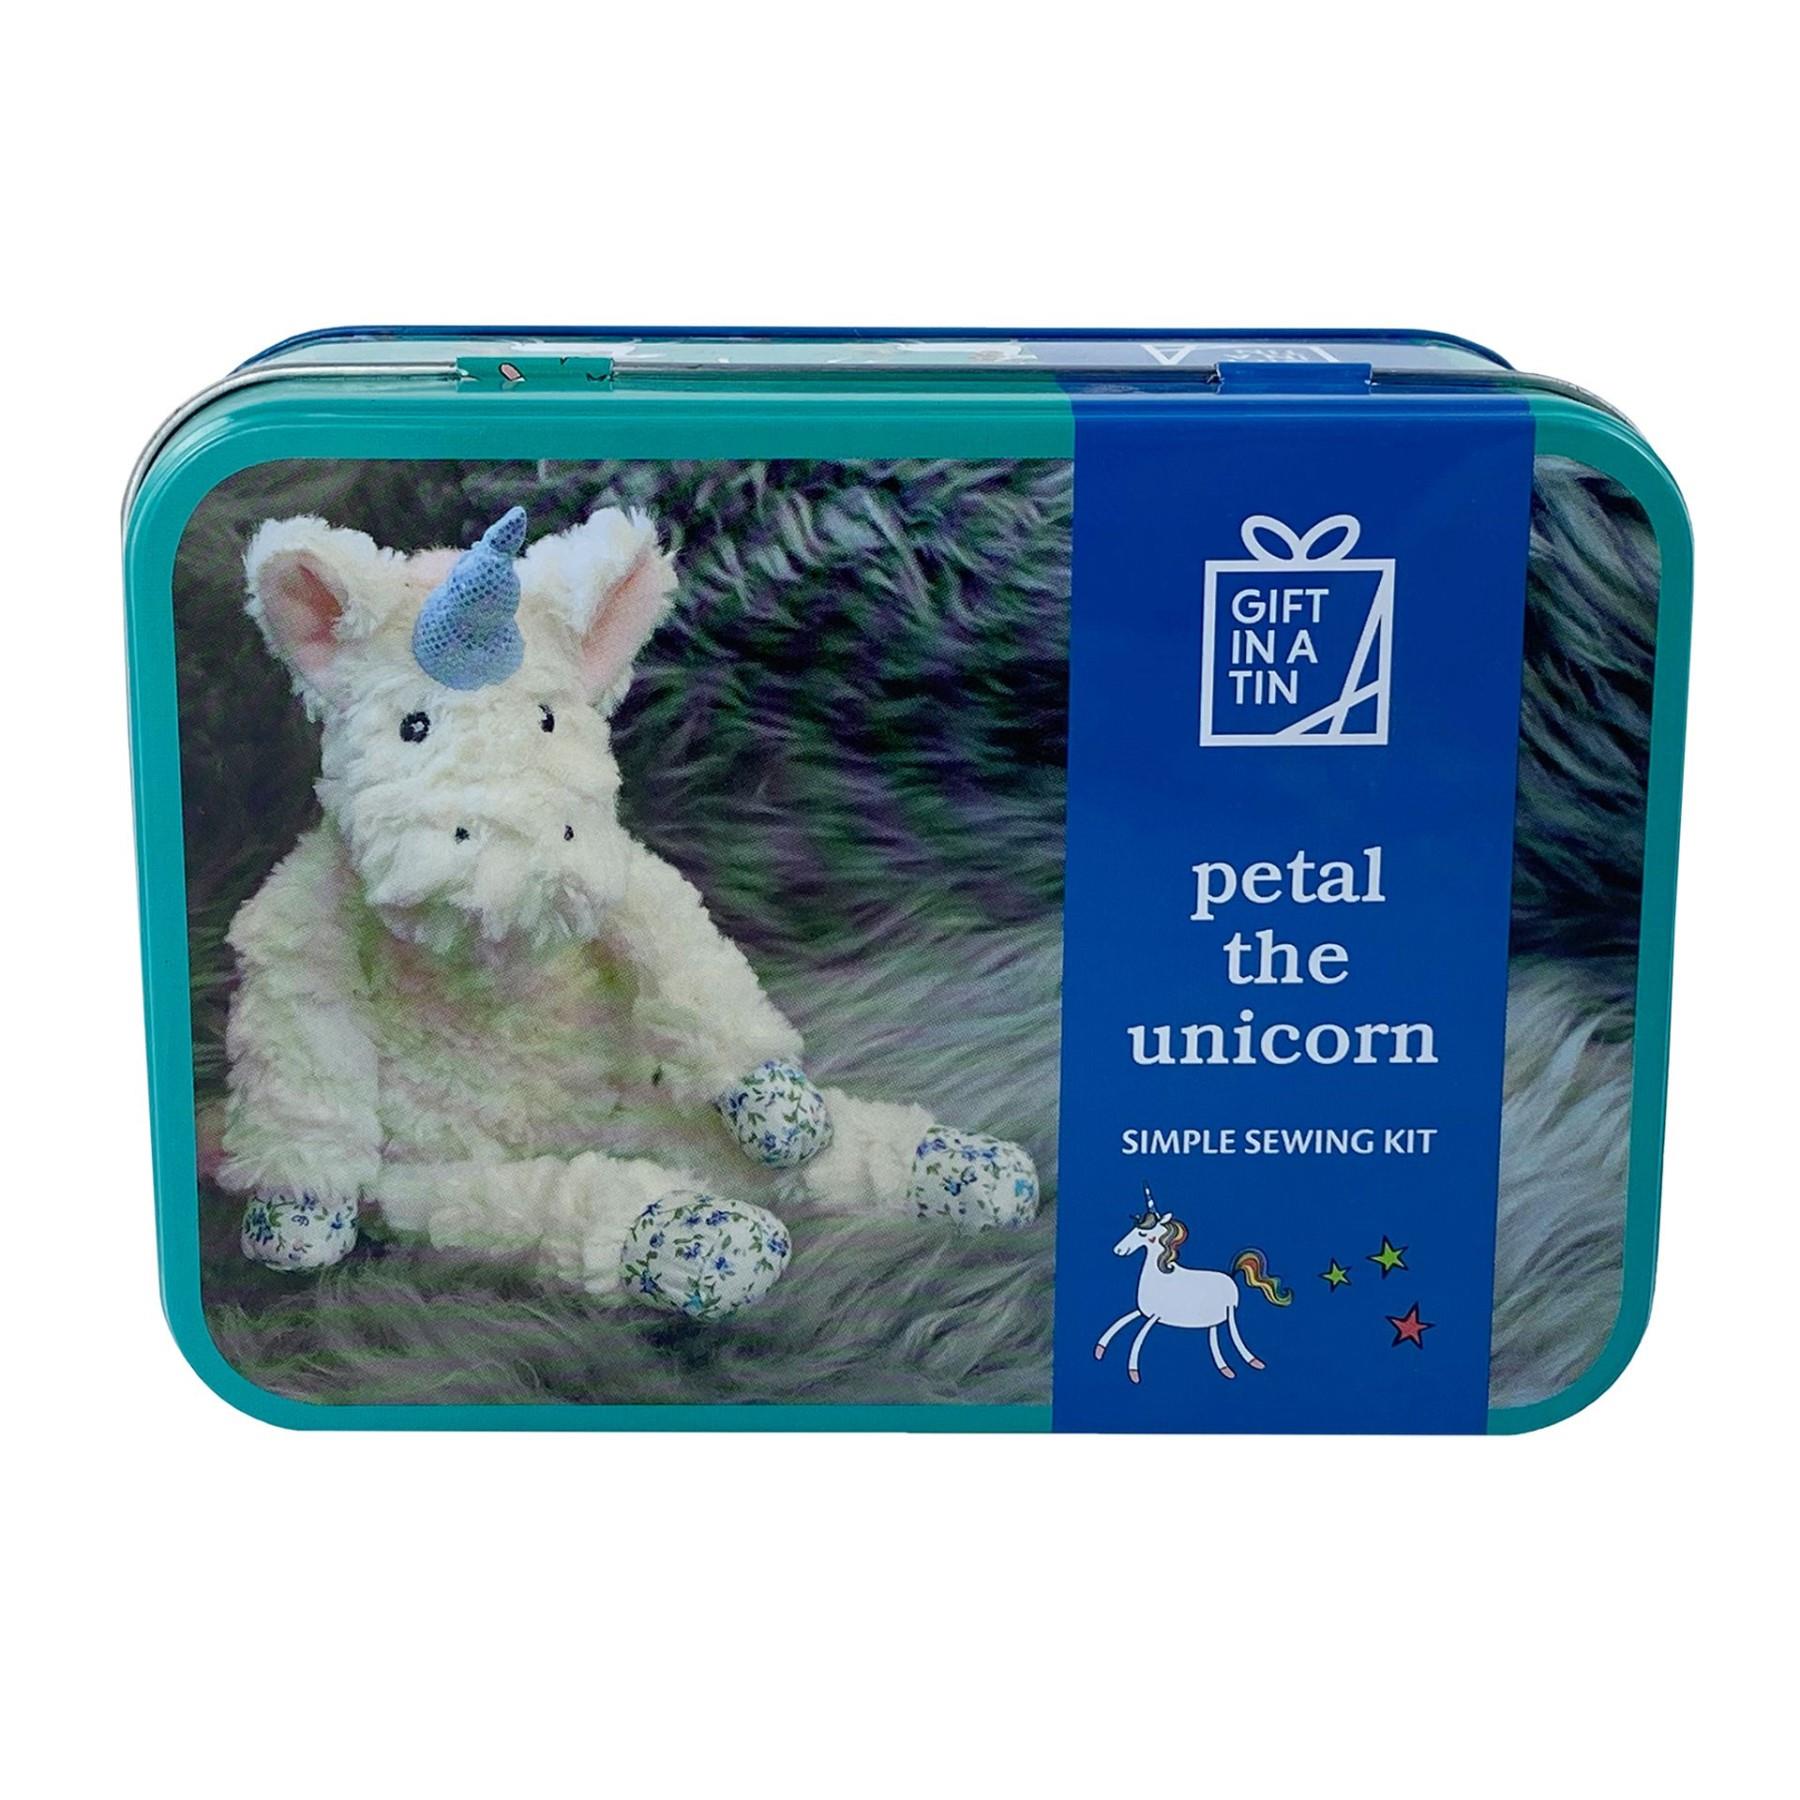 Gift in A Tin Craft / Activity Set Age 6+ - Petal the Unicorn Sewing Kit